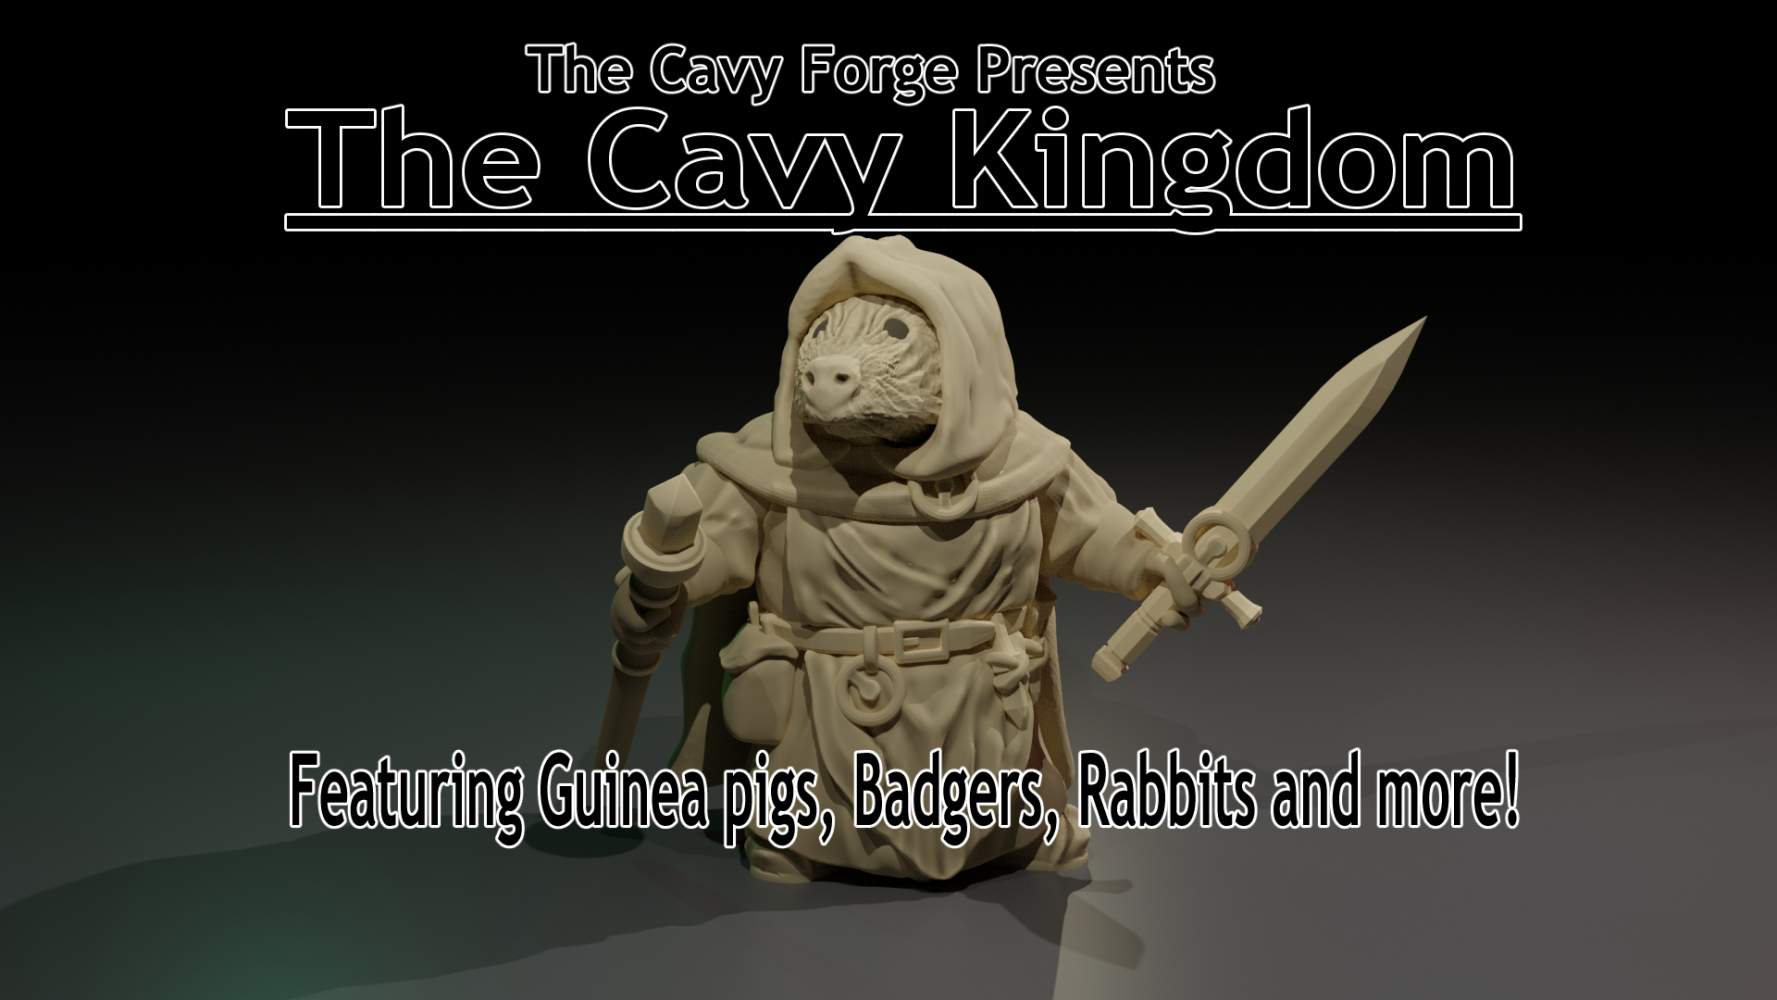 The Cavy Kingdom Expands - Fantasy Guineas, Lizards, Badgers, Rabbits and more!